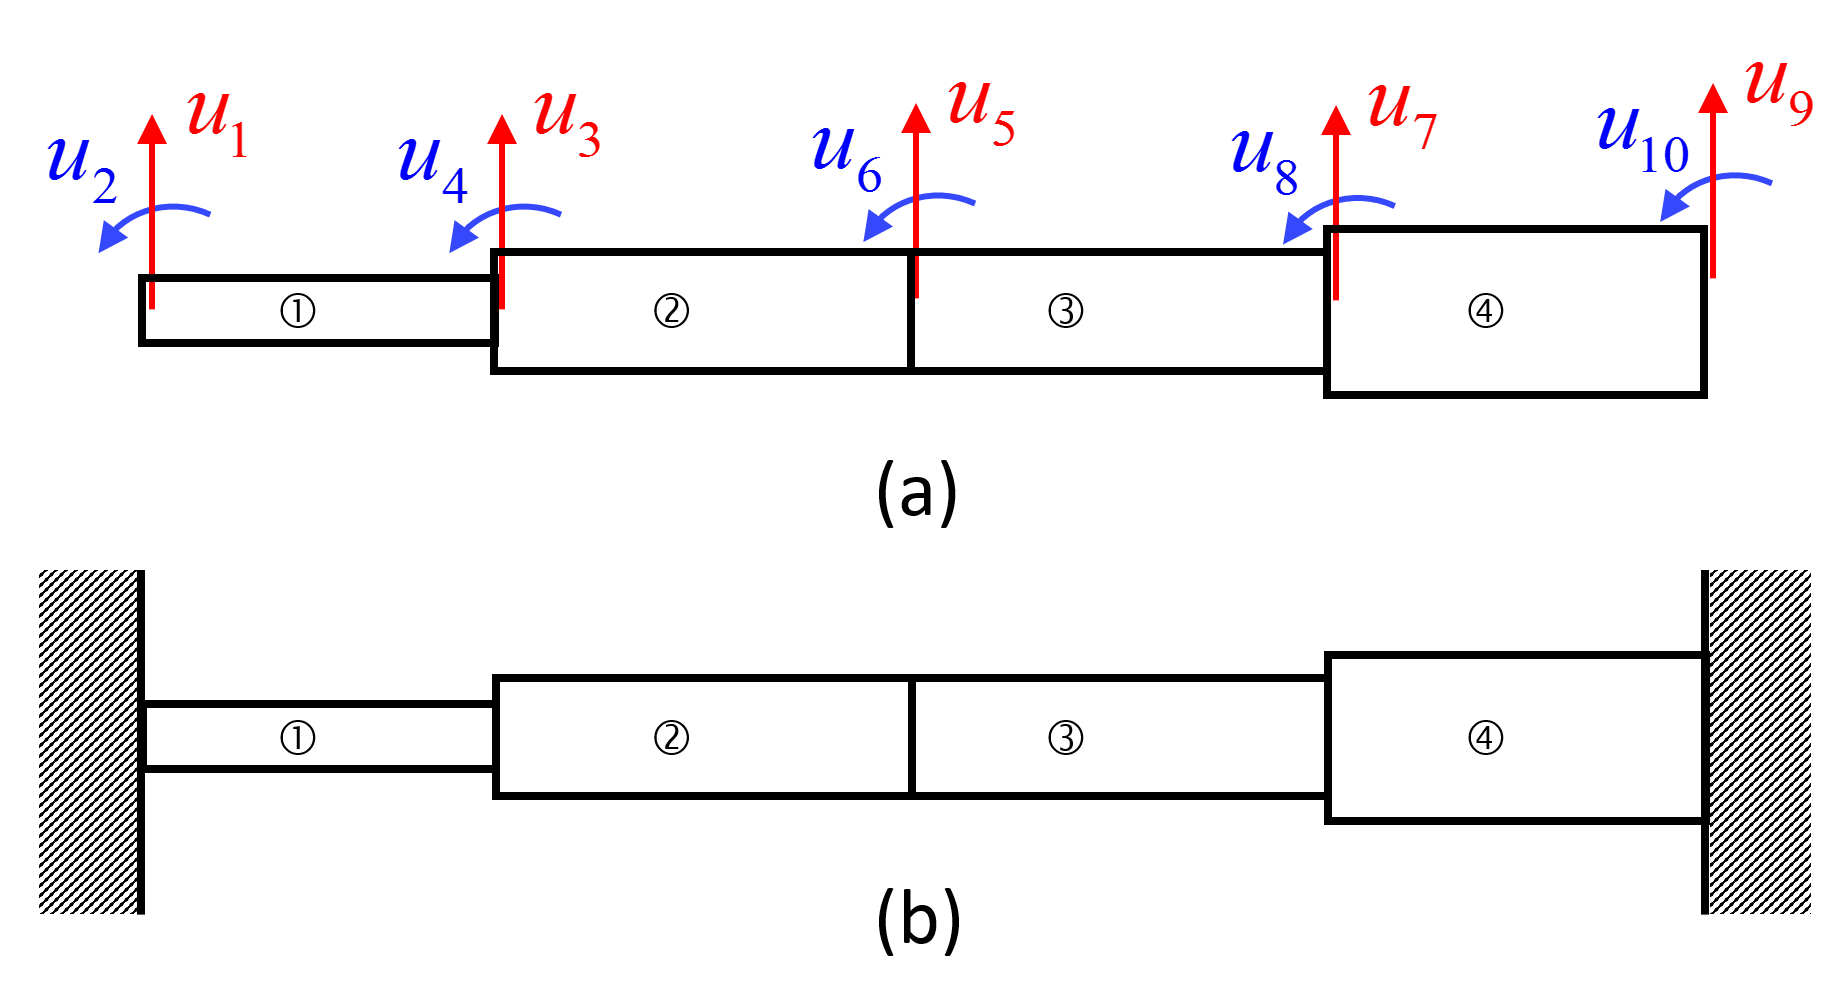 Free-free system in Fig.(a) is a supplementary system for the constrained system, shown in Fig.(b).